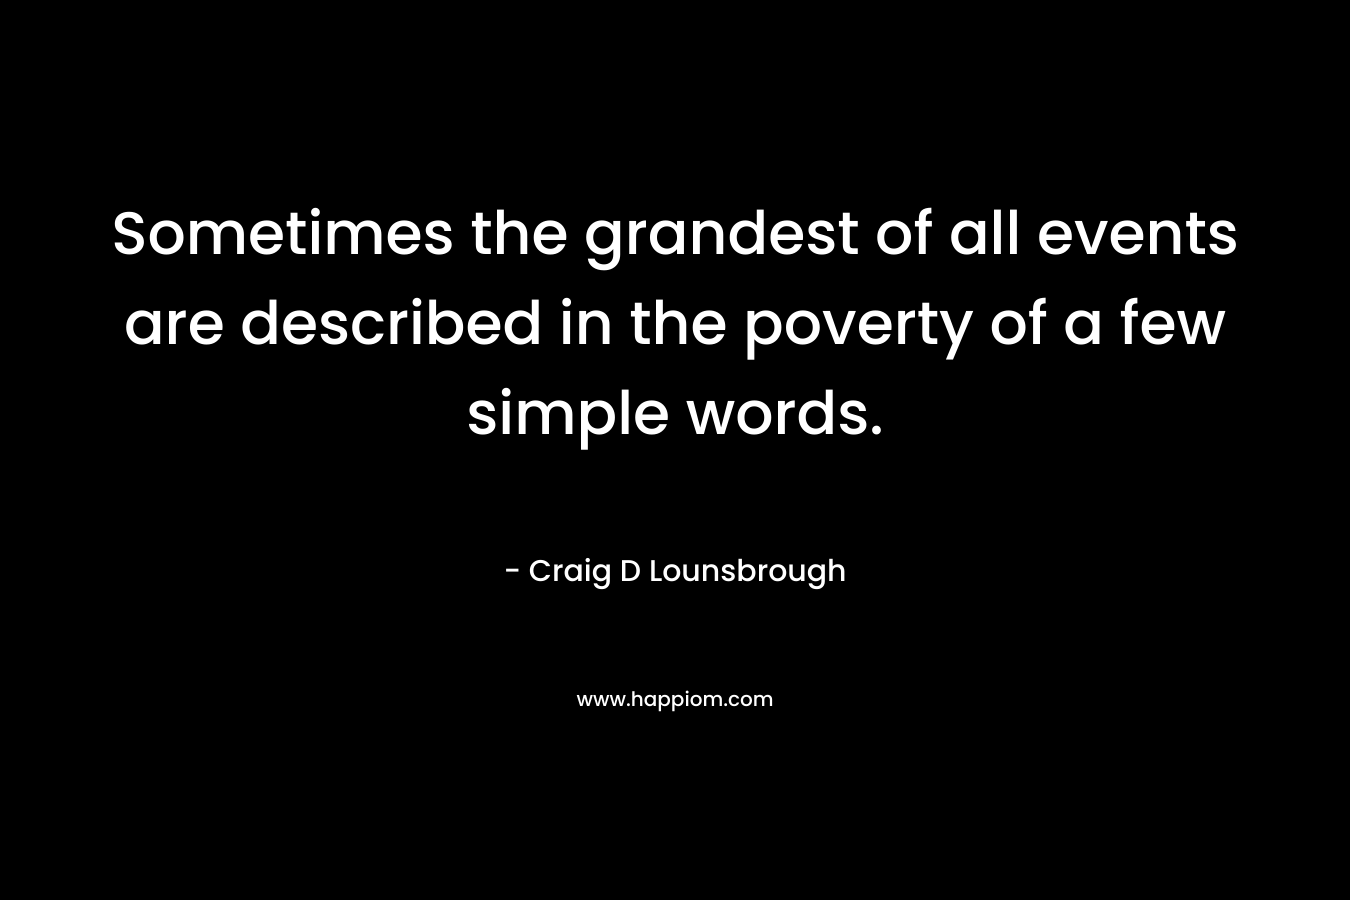 Sometimes the grandest of all events are described in the poverty of a few simple words.